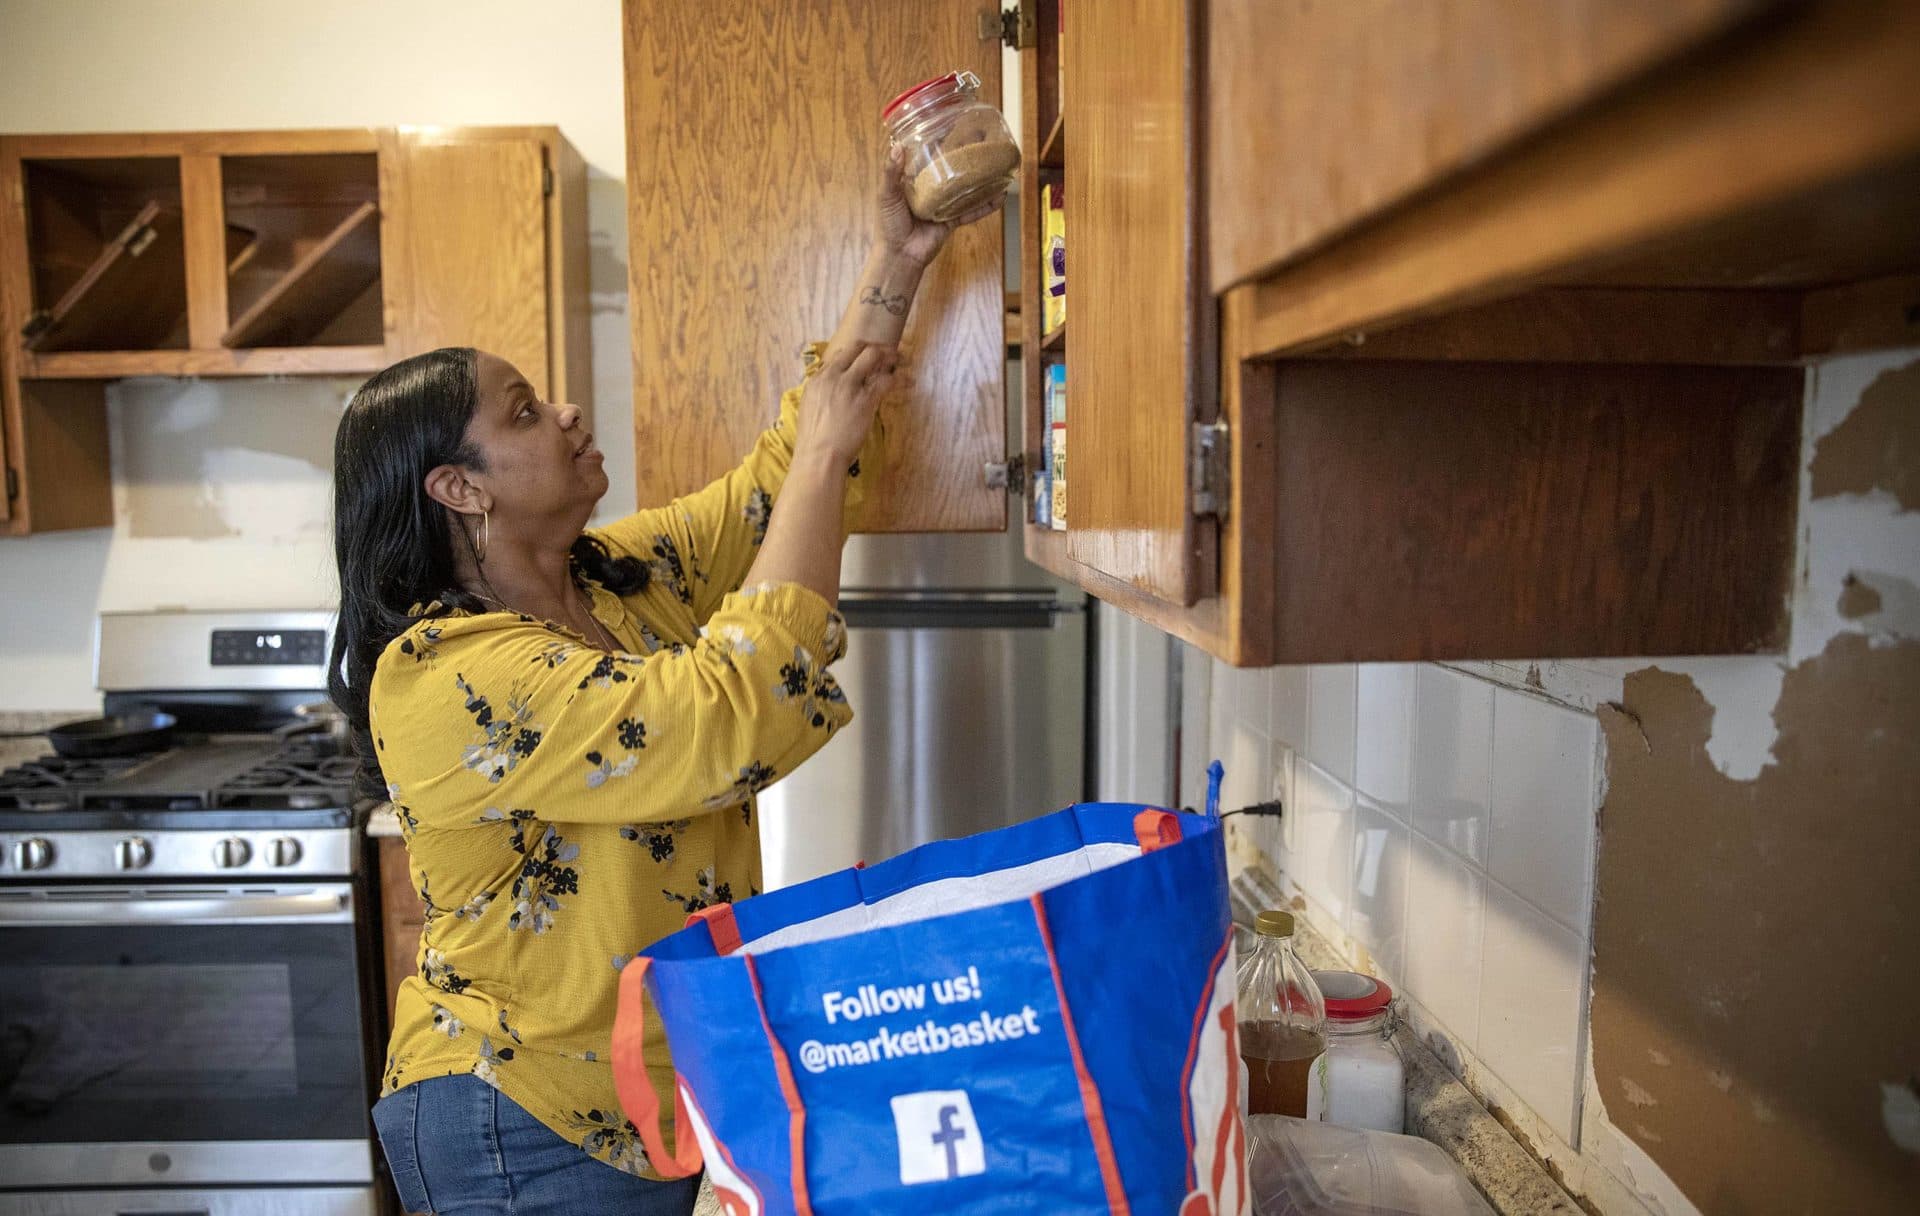 With redecorating underway at her new home in Dorchester, Cecilia Dixon unloads groceries in her kitchen. (Robin Lubbock/WBUR)